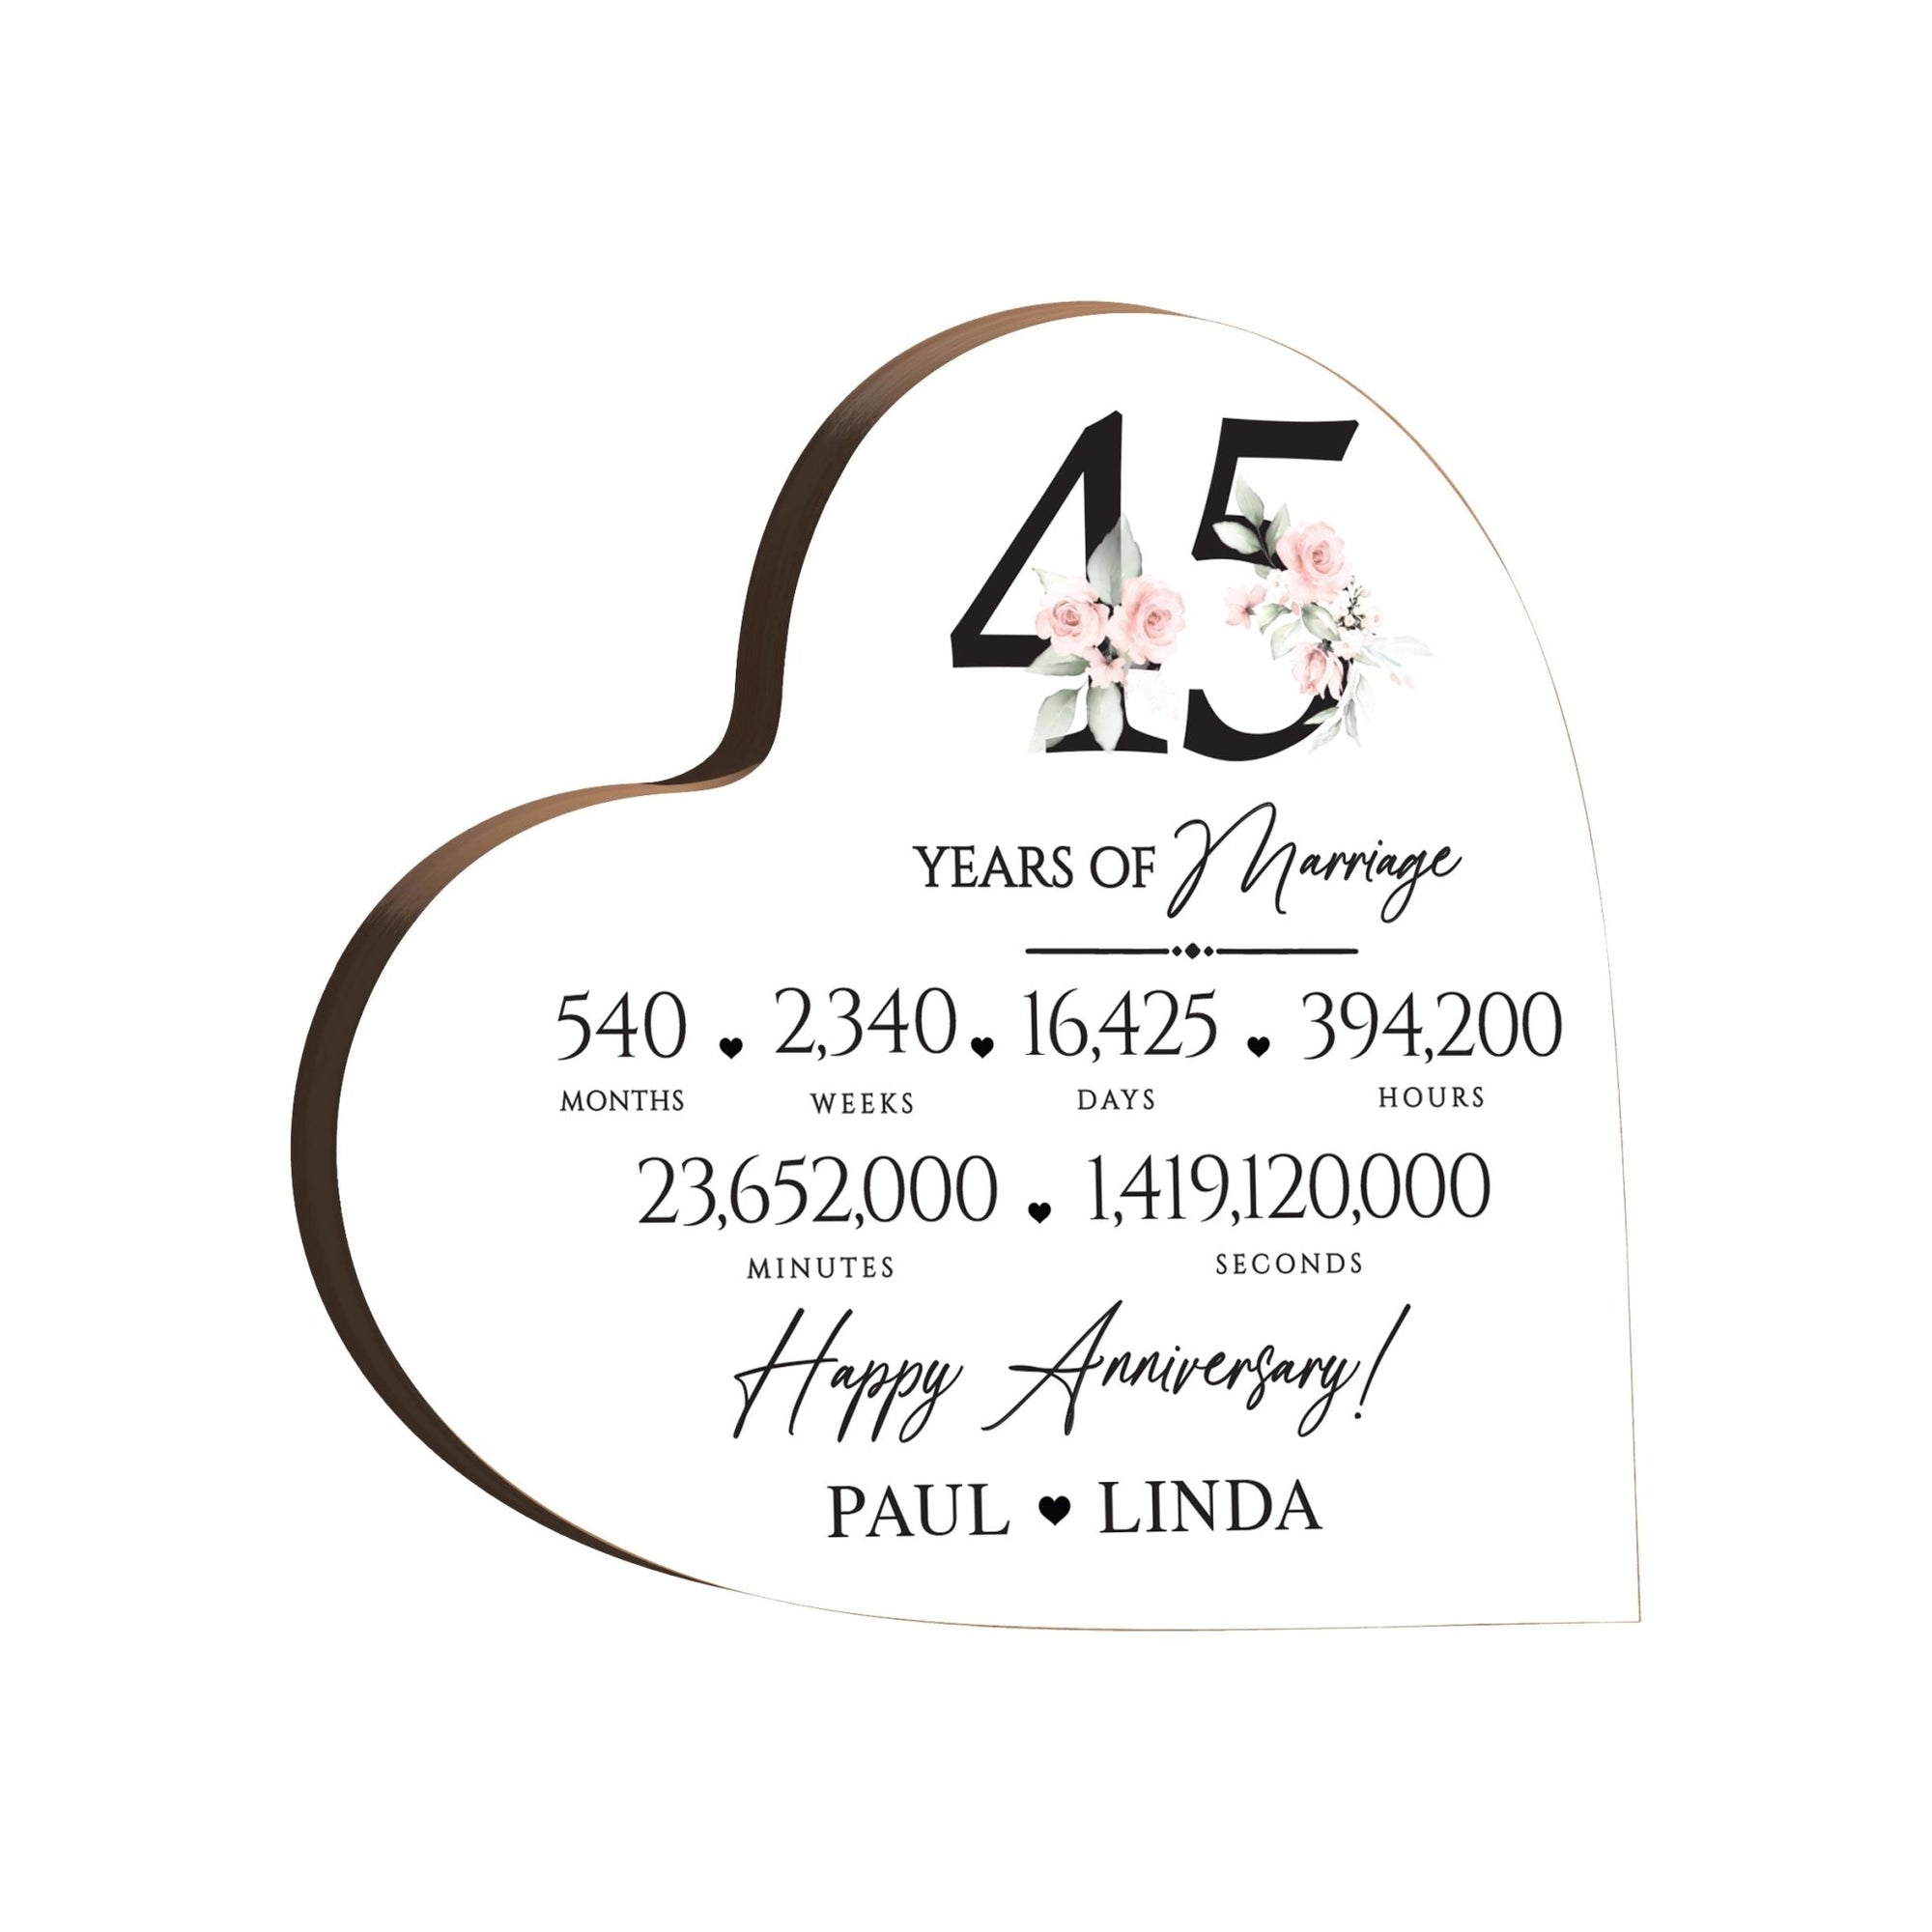 Personalized Wooden Anniversary Heart Shaped Signs - 45th Anniversary - LifeSong Milestones